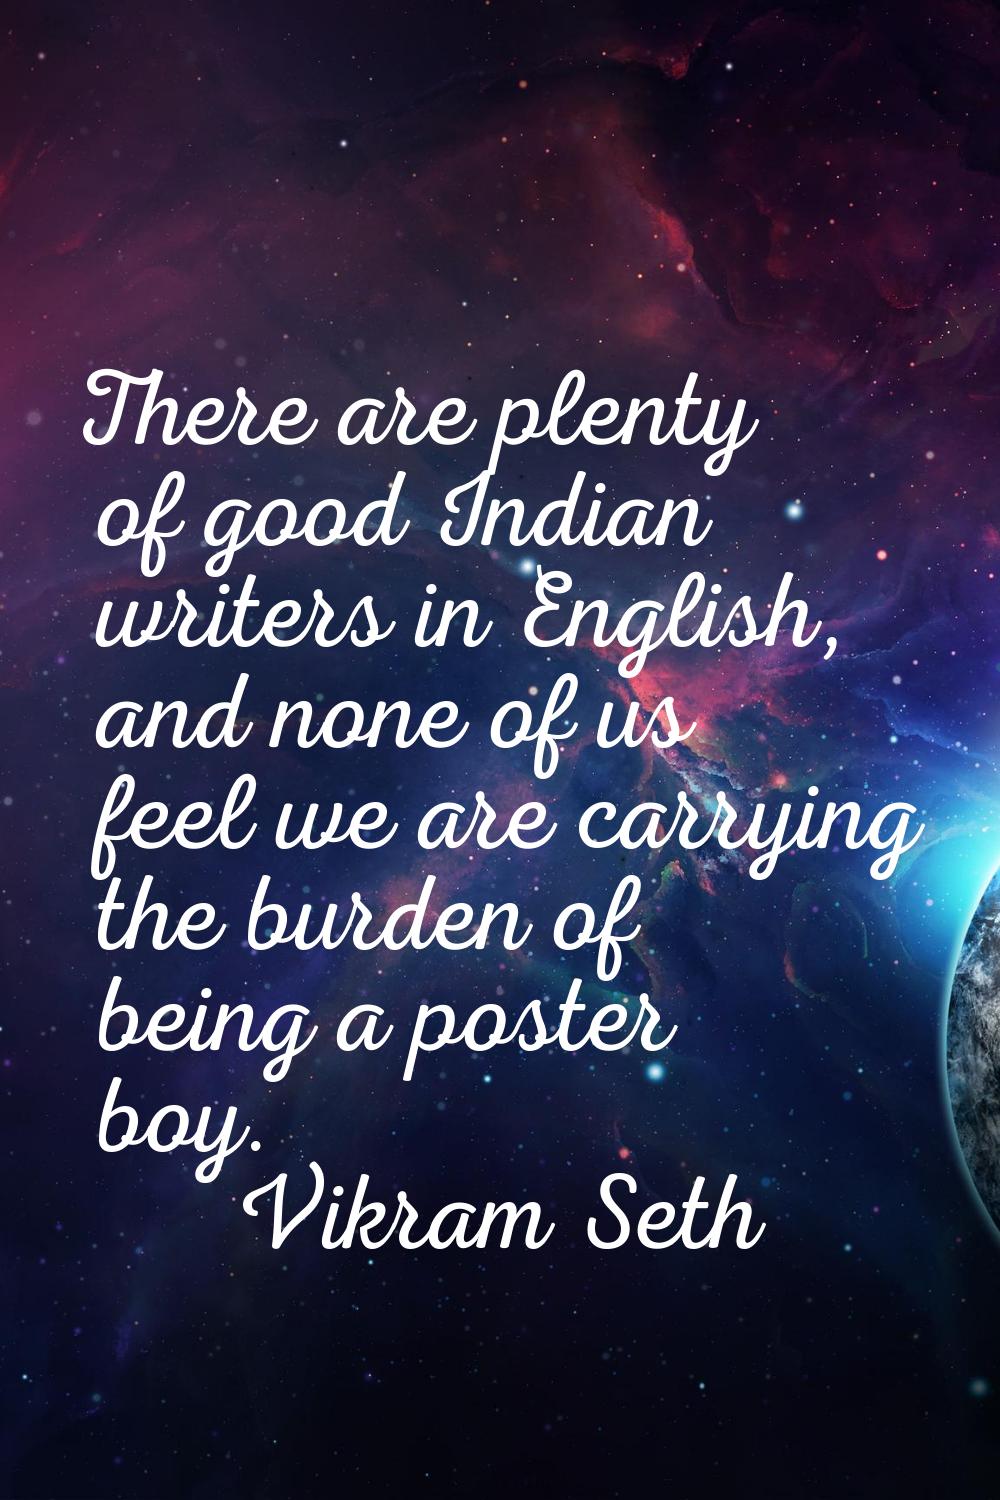 There are plenty of good Indian writers in English, and none of us feel we are carrying the burden 